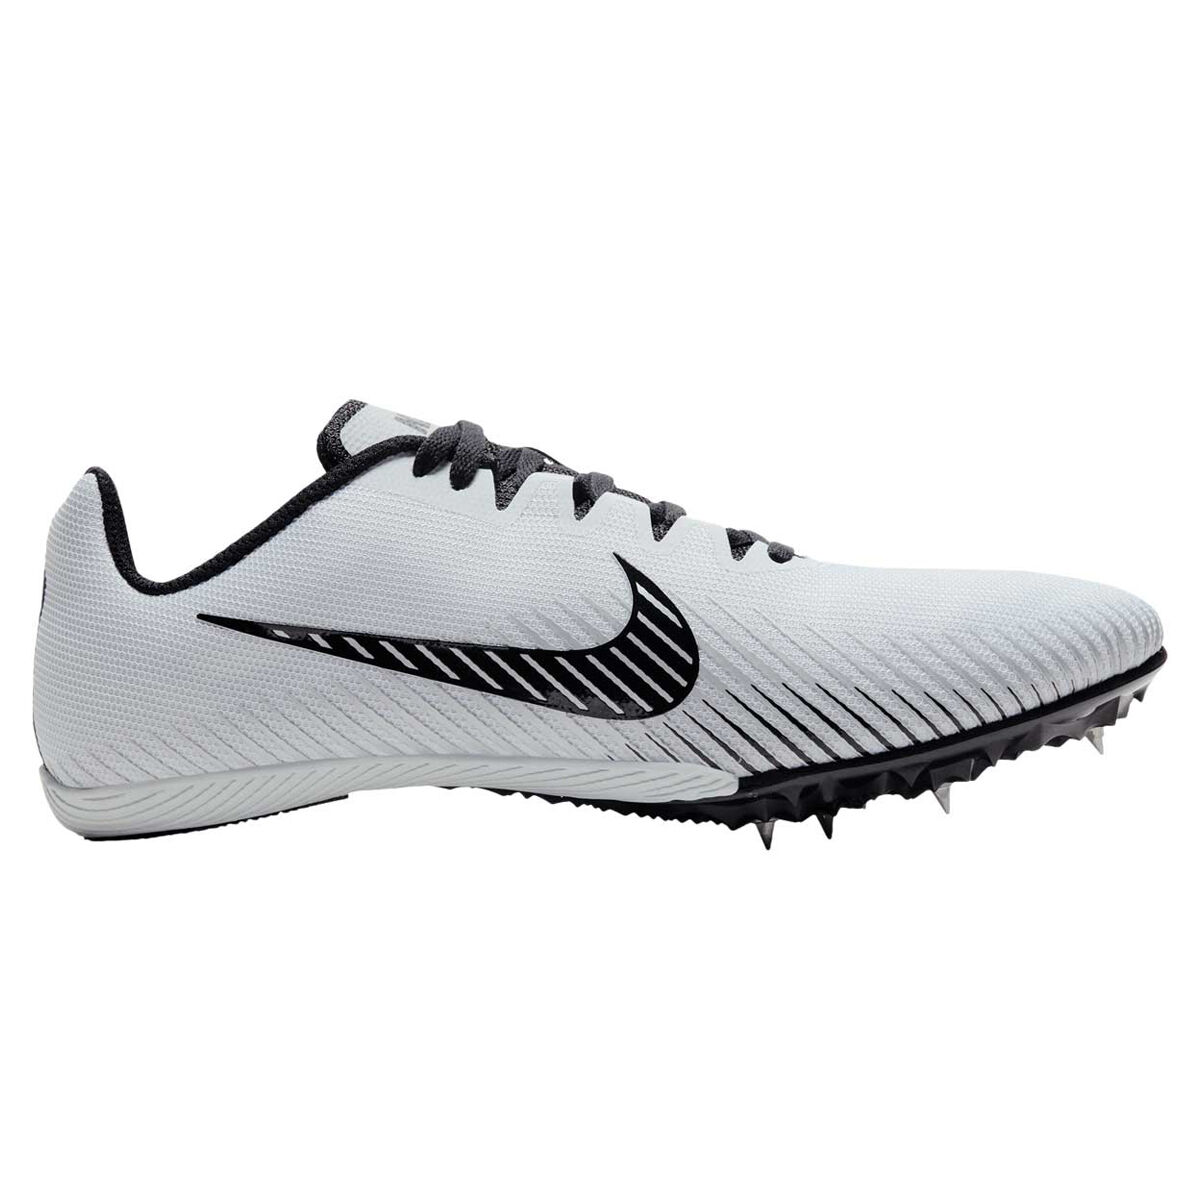 Women's Running Spikes \u0026 Athletic Shoes 